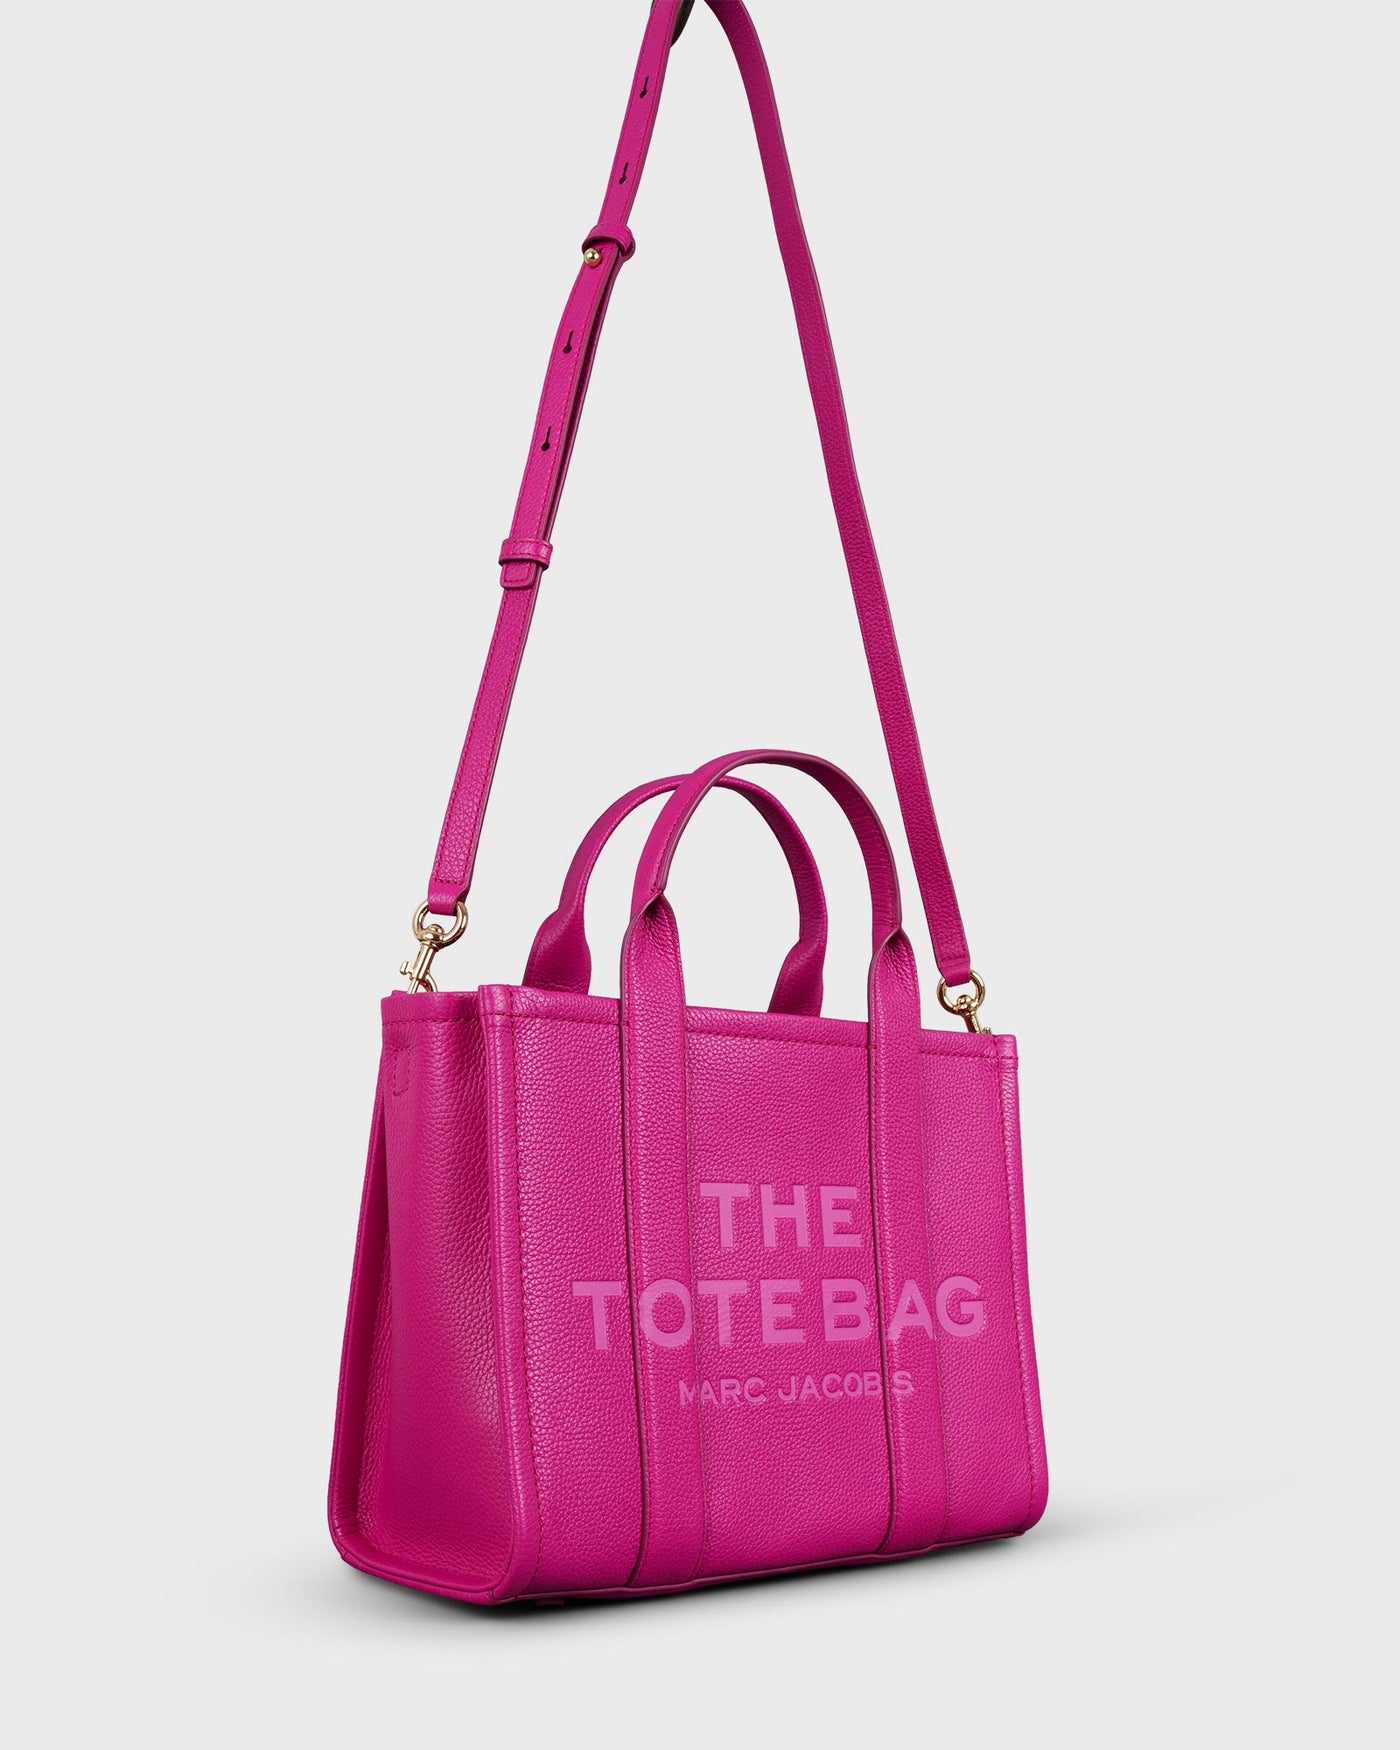 Marc Jacobs Tasche The Leather Medium Tote Bag Lipstick Pink myMEID